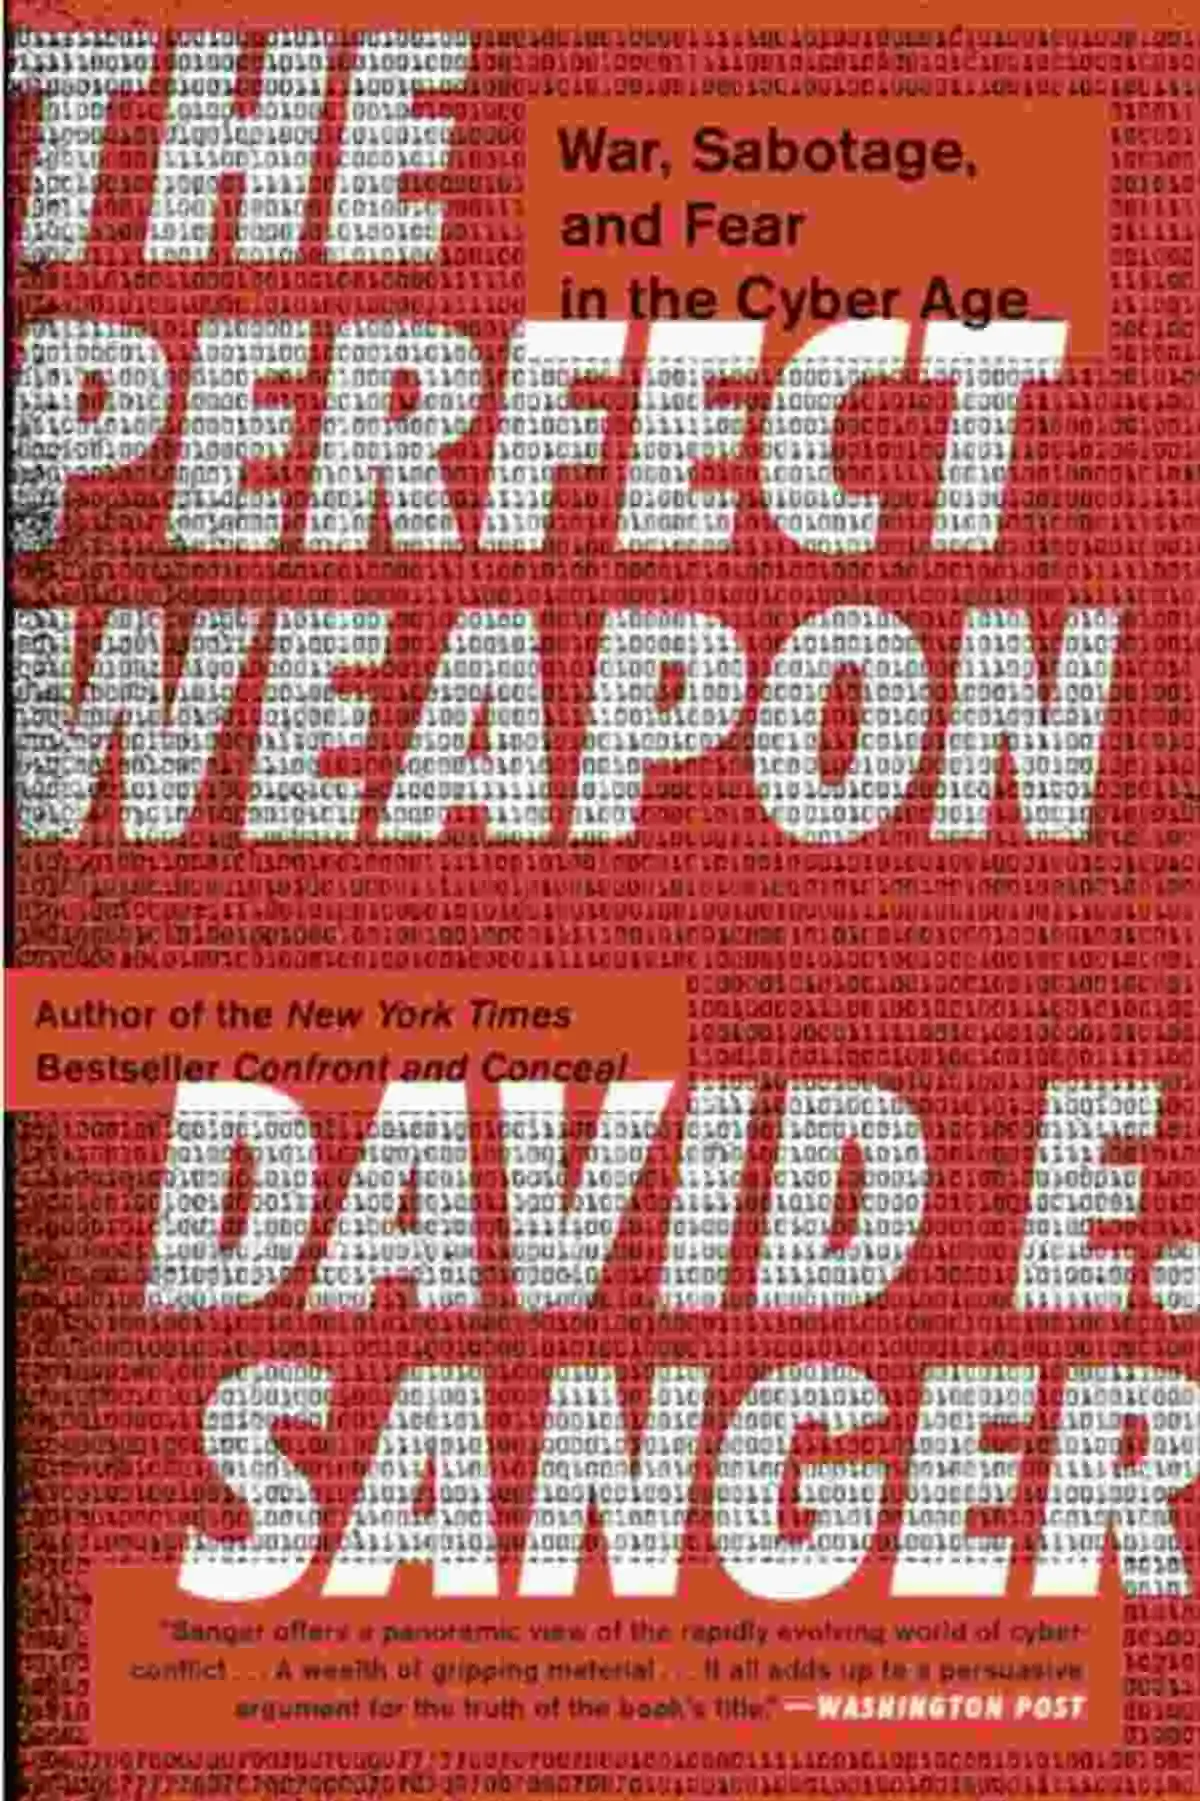 The Perfect Weapon: War, Sabotage, and Fear in the Cyber Age by David E. Sanger ($14.99) | Amazon's Best Selling Tech Kindle eBooks